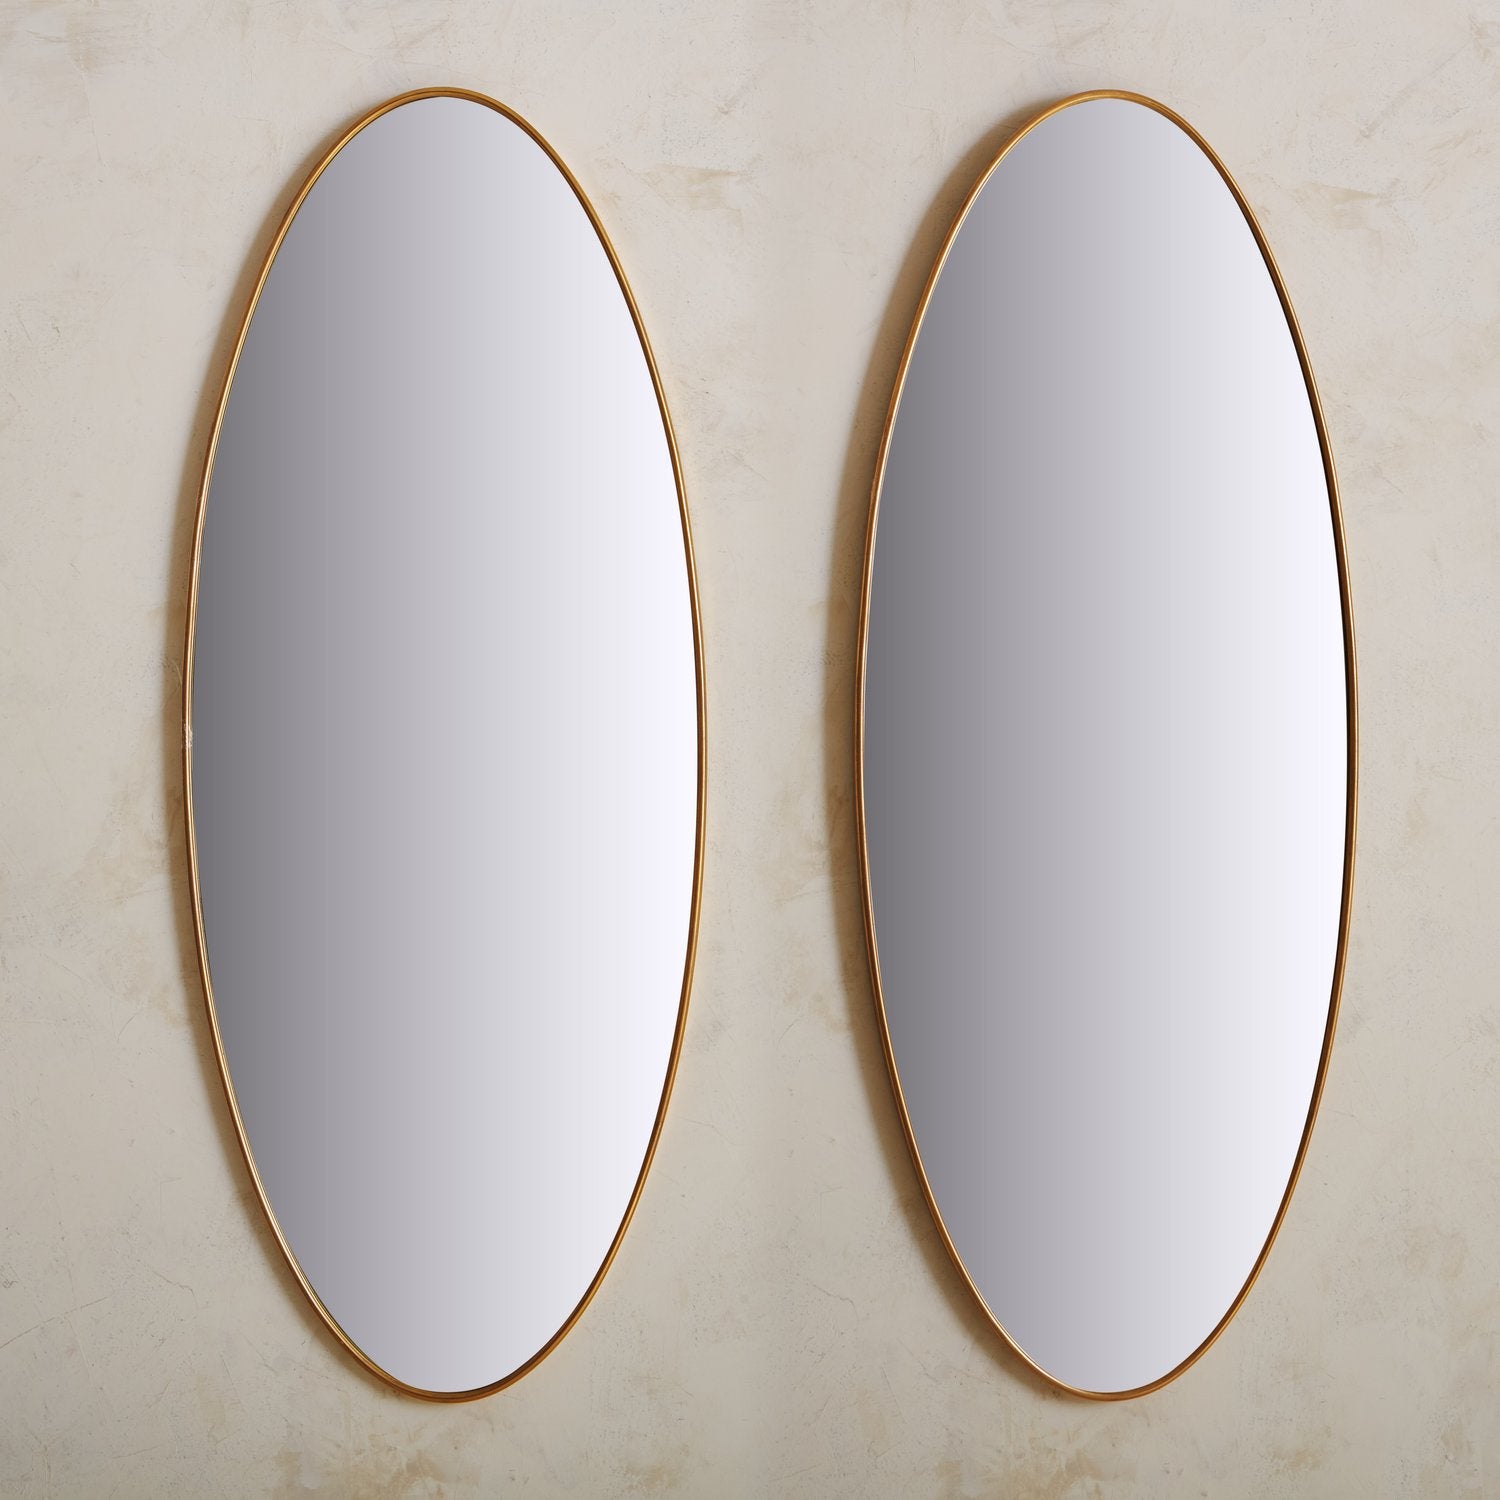 A vintage Italian mirror featuring an elongated oval shape with a delicate brass trim. This elegant piece has a wood backing and hardware for hanging. Sourced in Italy, 20th Century. One Available, Priced Individually.